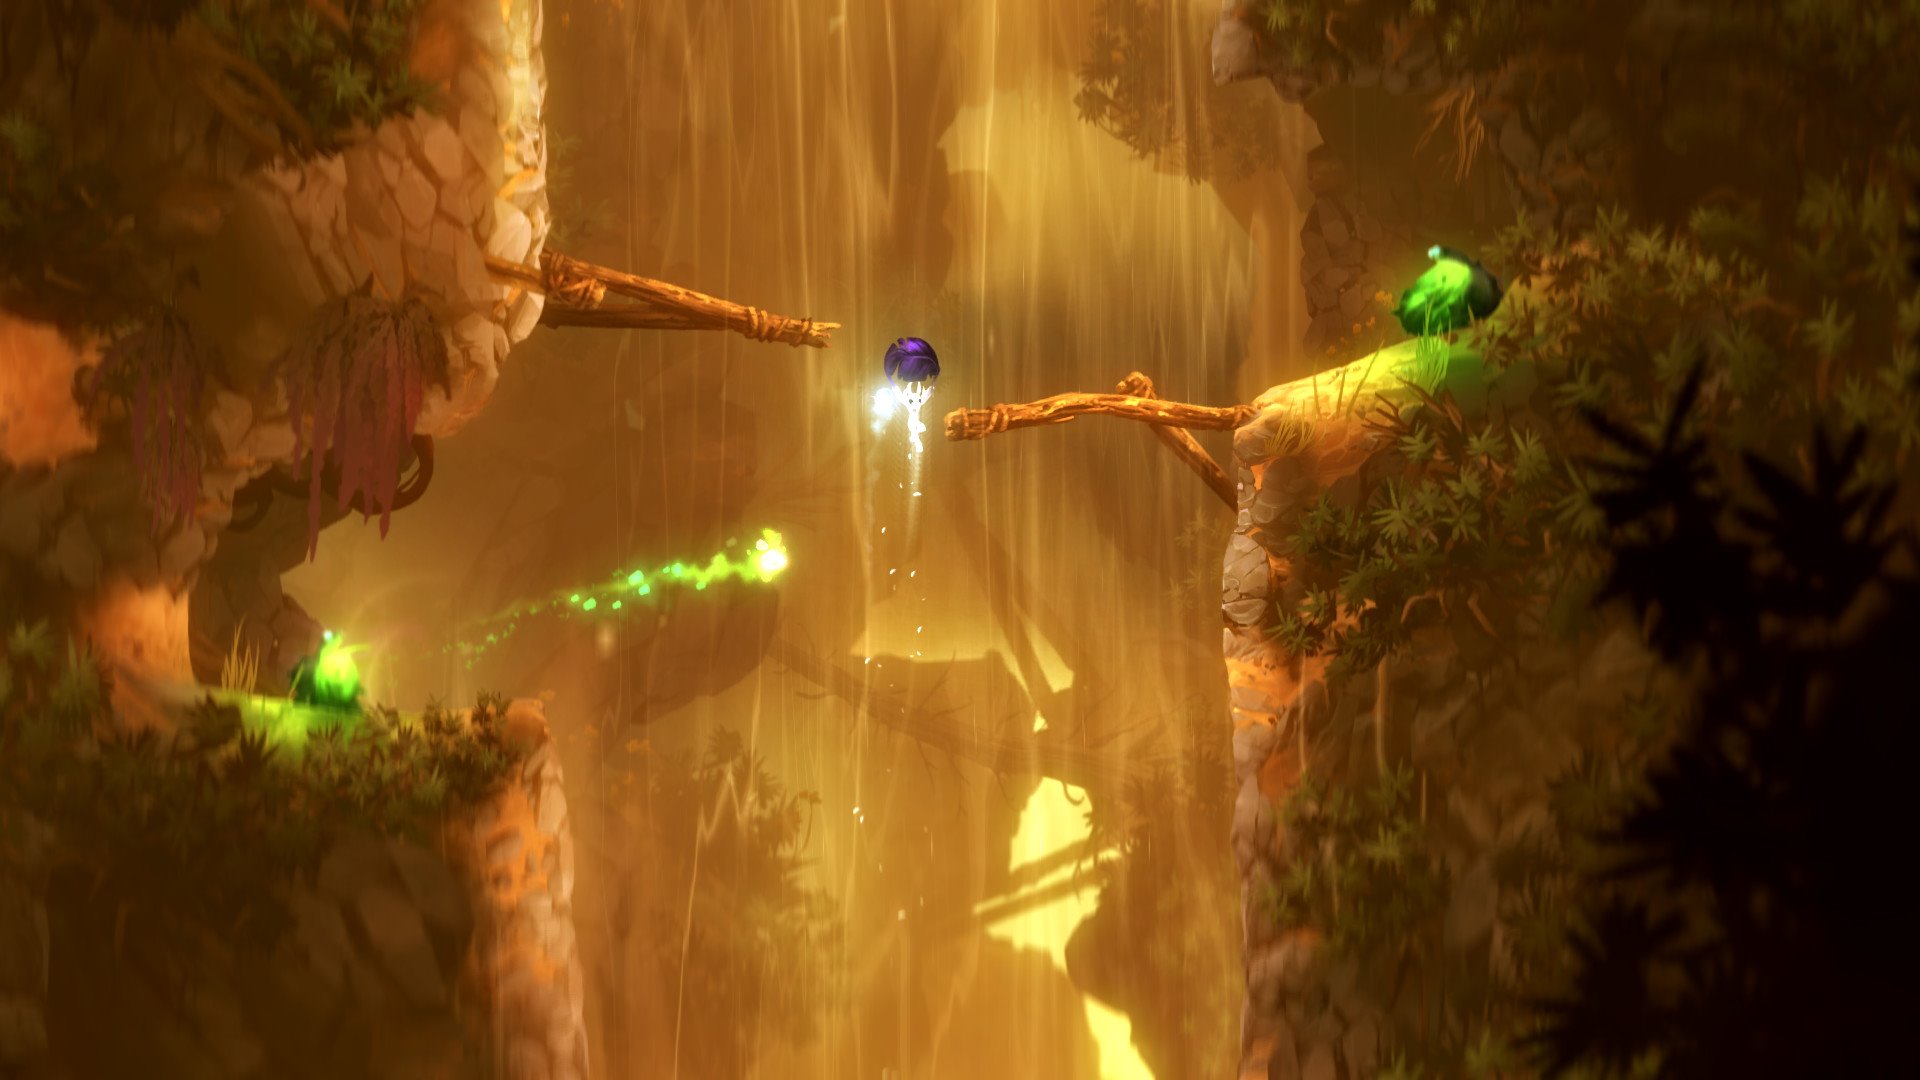 Screenshot for the game Ori and the Blind Forest: Definitive Edition (2016) RS | Repack from R.G. Mechanics